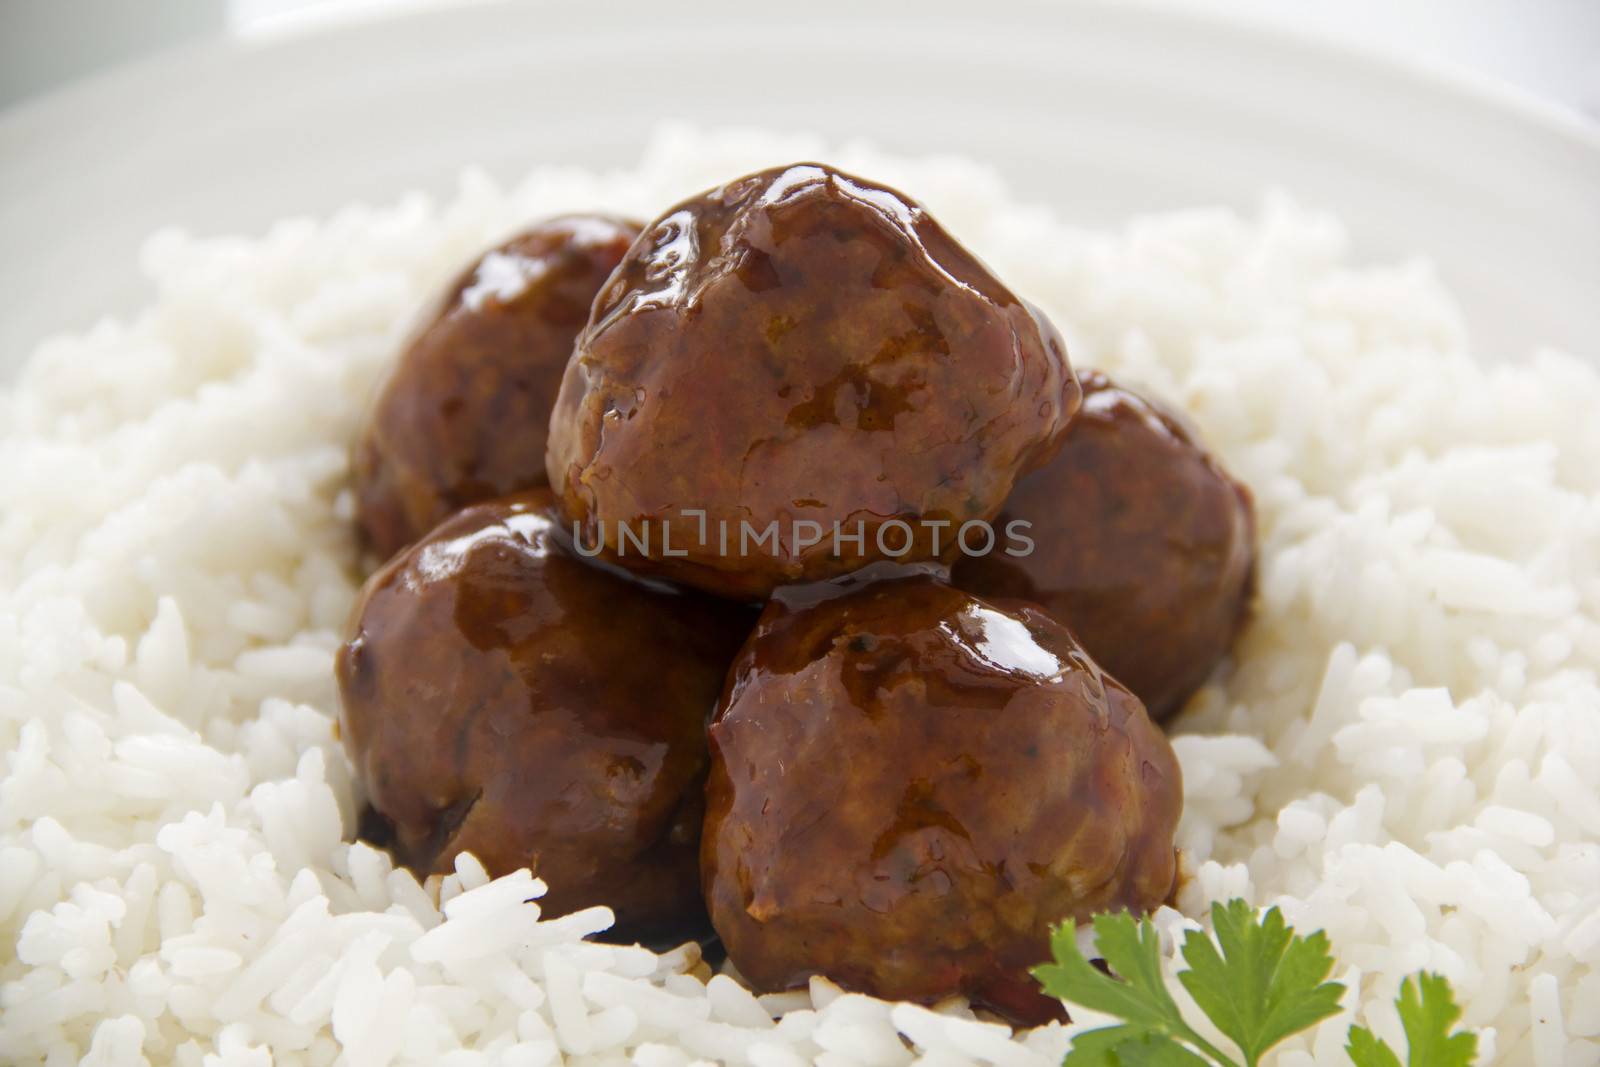 Chinese meat balls in hoisin sauce on a bed of white rice with parsley.